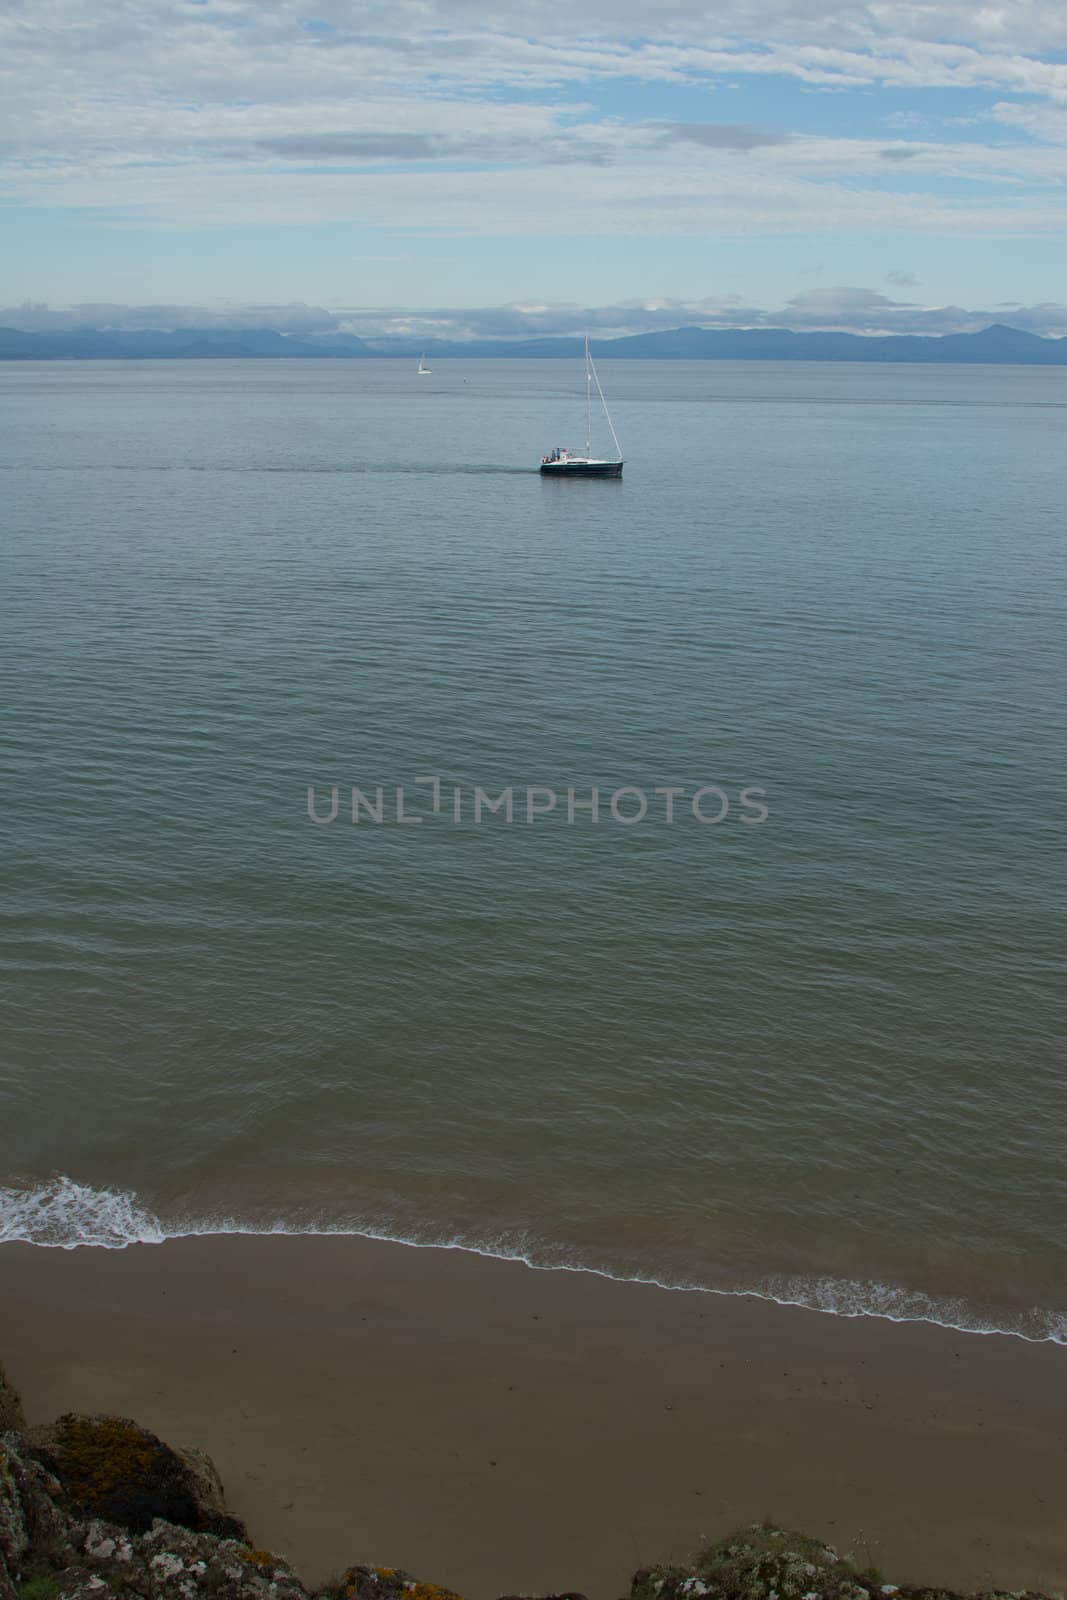 A small wave breaks on a sandy shore and a yacht motors in a green, blue sea with mountains on the horizon.